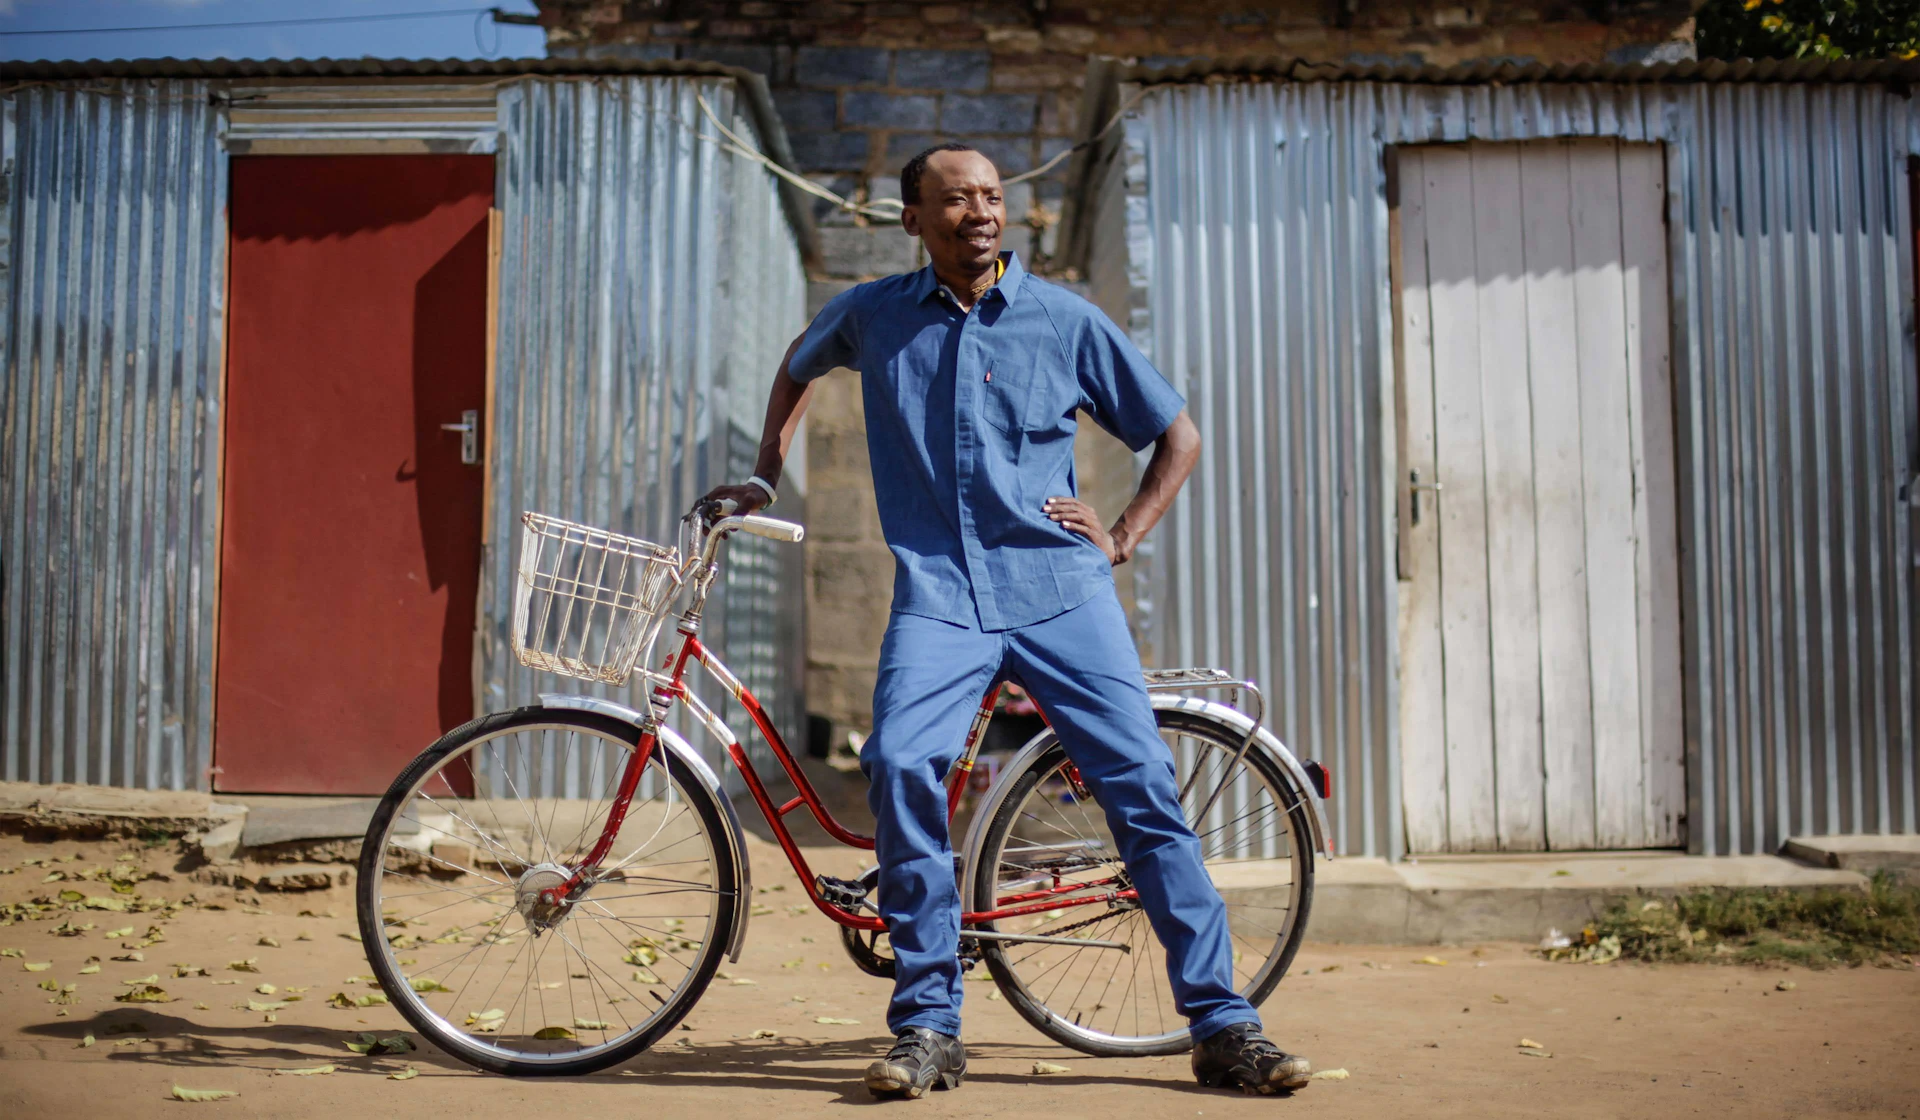 Joburg’s pioneering cyclists are breaking down social barriers, one ride at a time